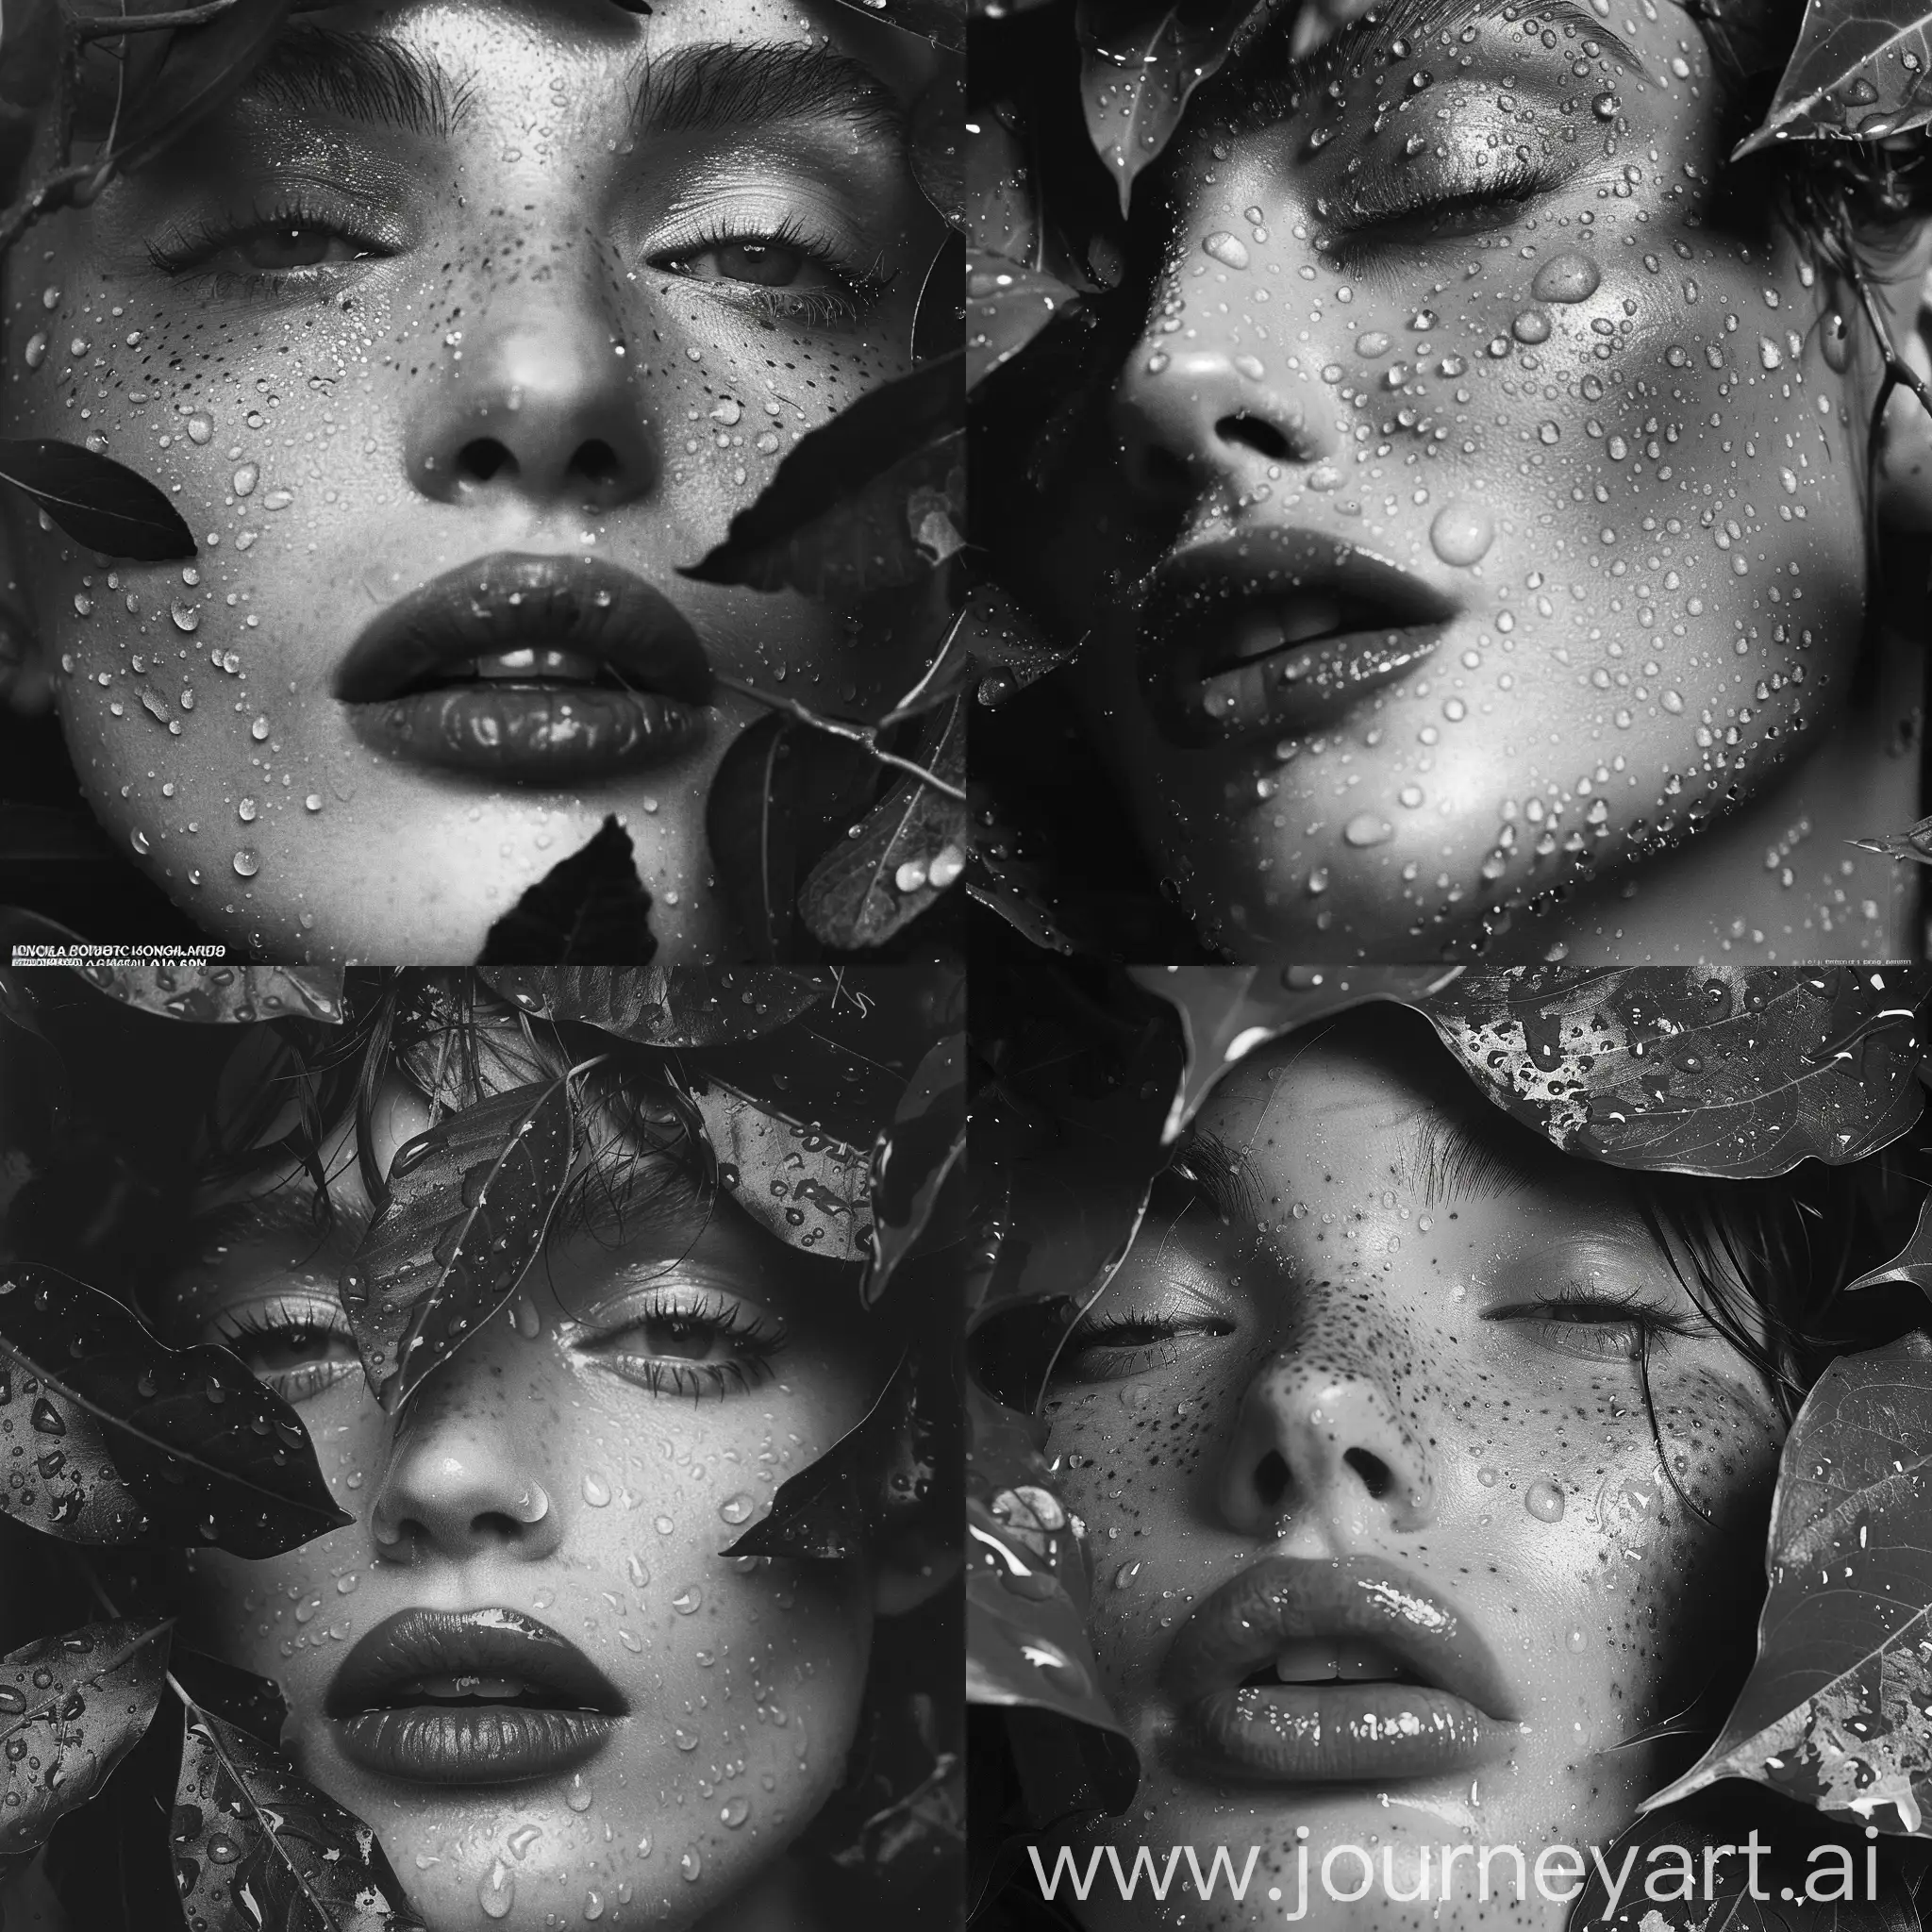 Monochrome-Vogue-Portrait-Madonna-with-Freckles-and-DewCovered-Skin